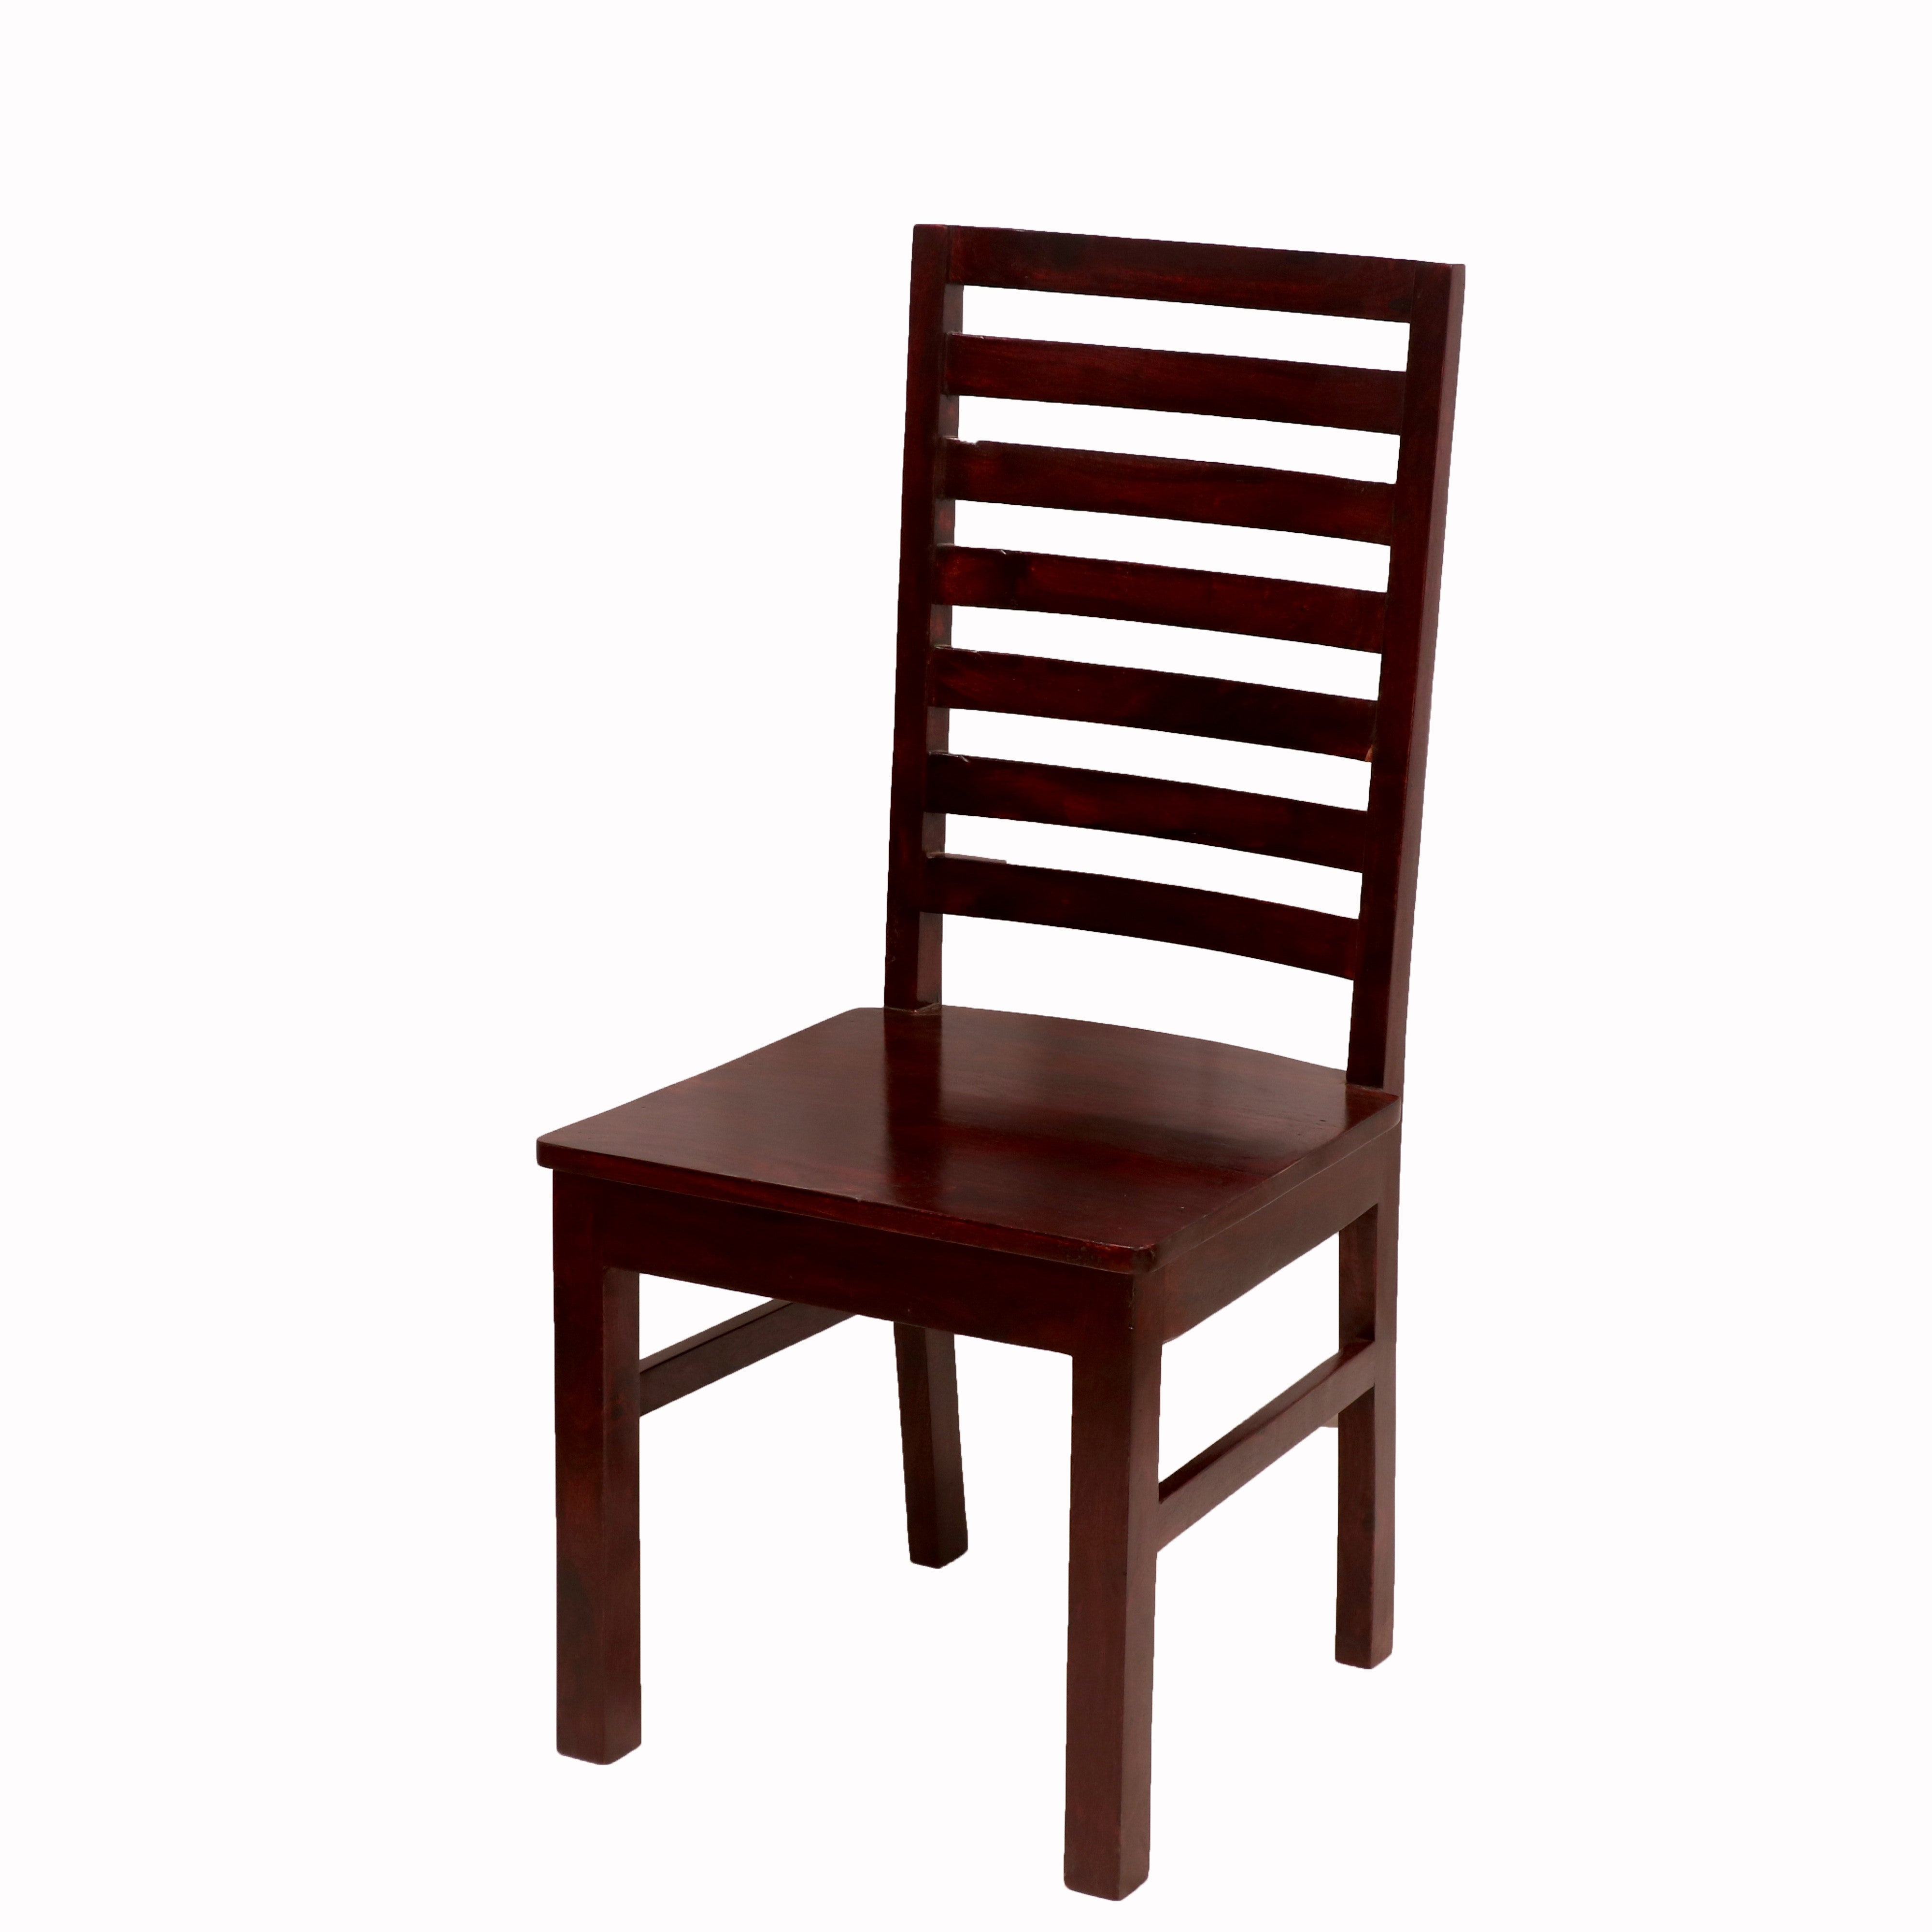 (Set of 2) Symmetrical Strip Backed Chair Dining Chair